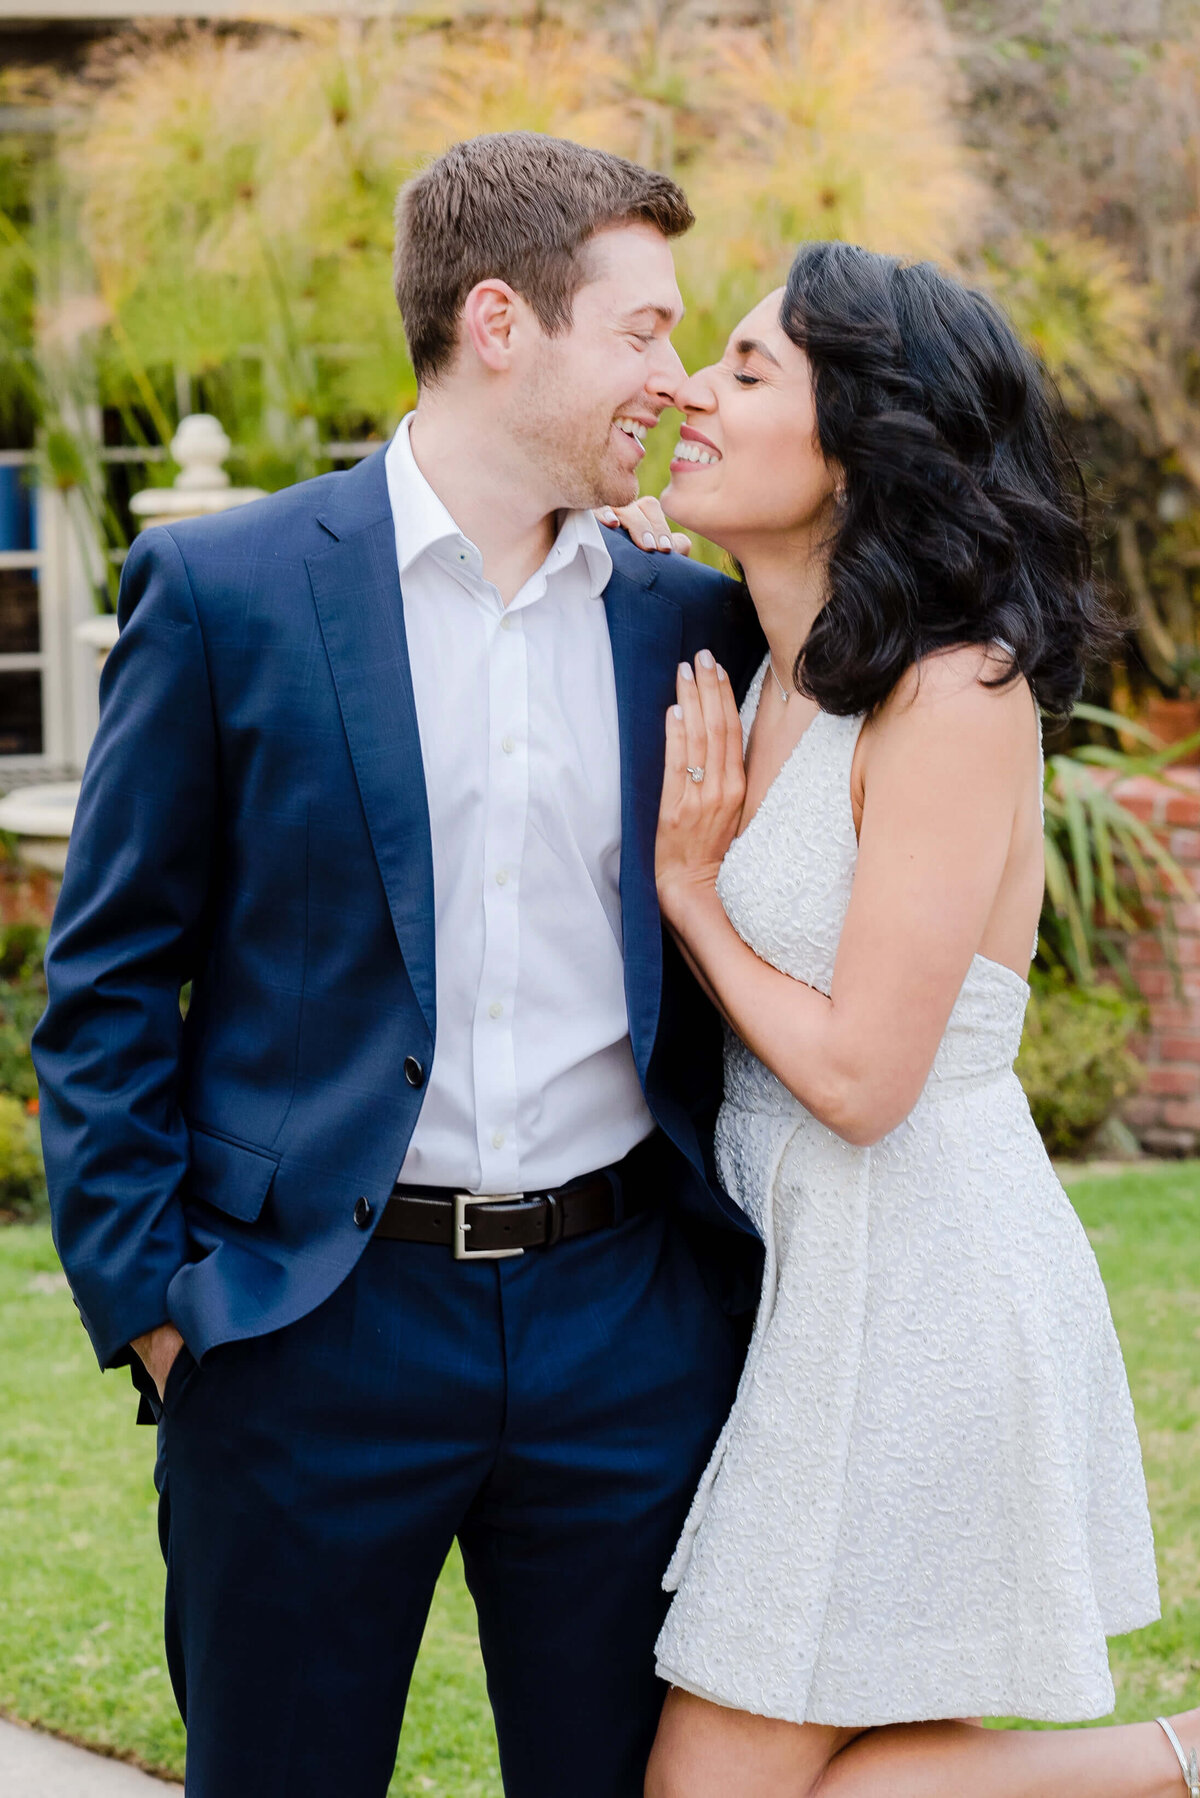 Los Angeles Wedding and Engagement Photographer Karina Pires Photography - Serving the areas of LA, Santa Monica, and Southern California.